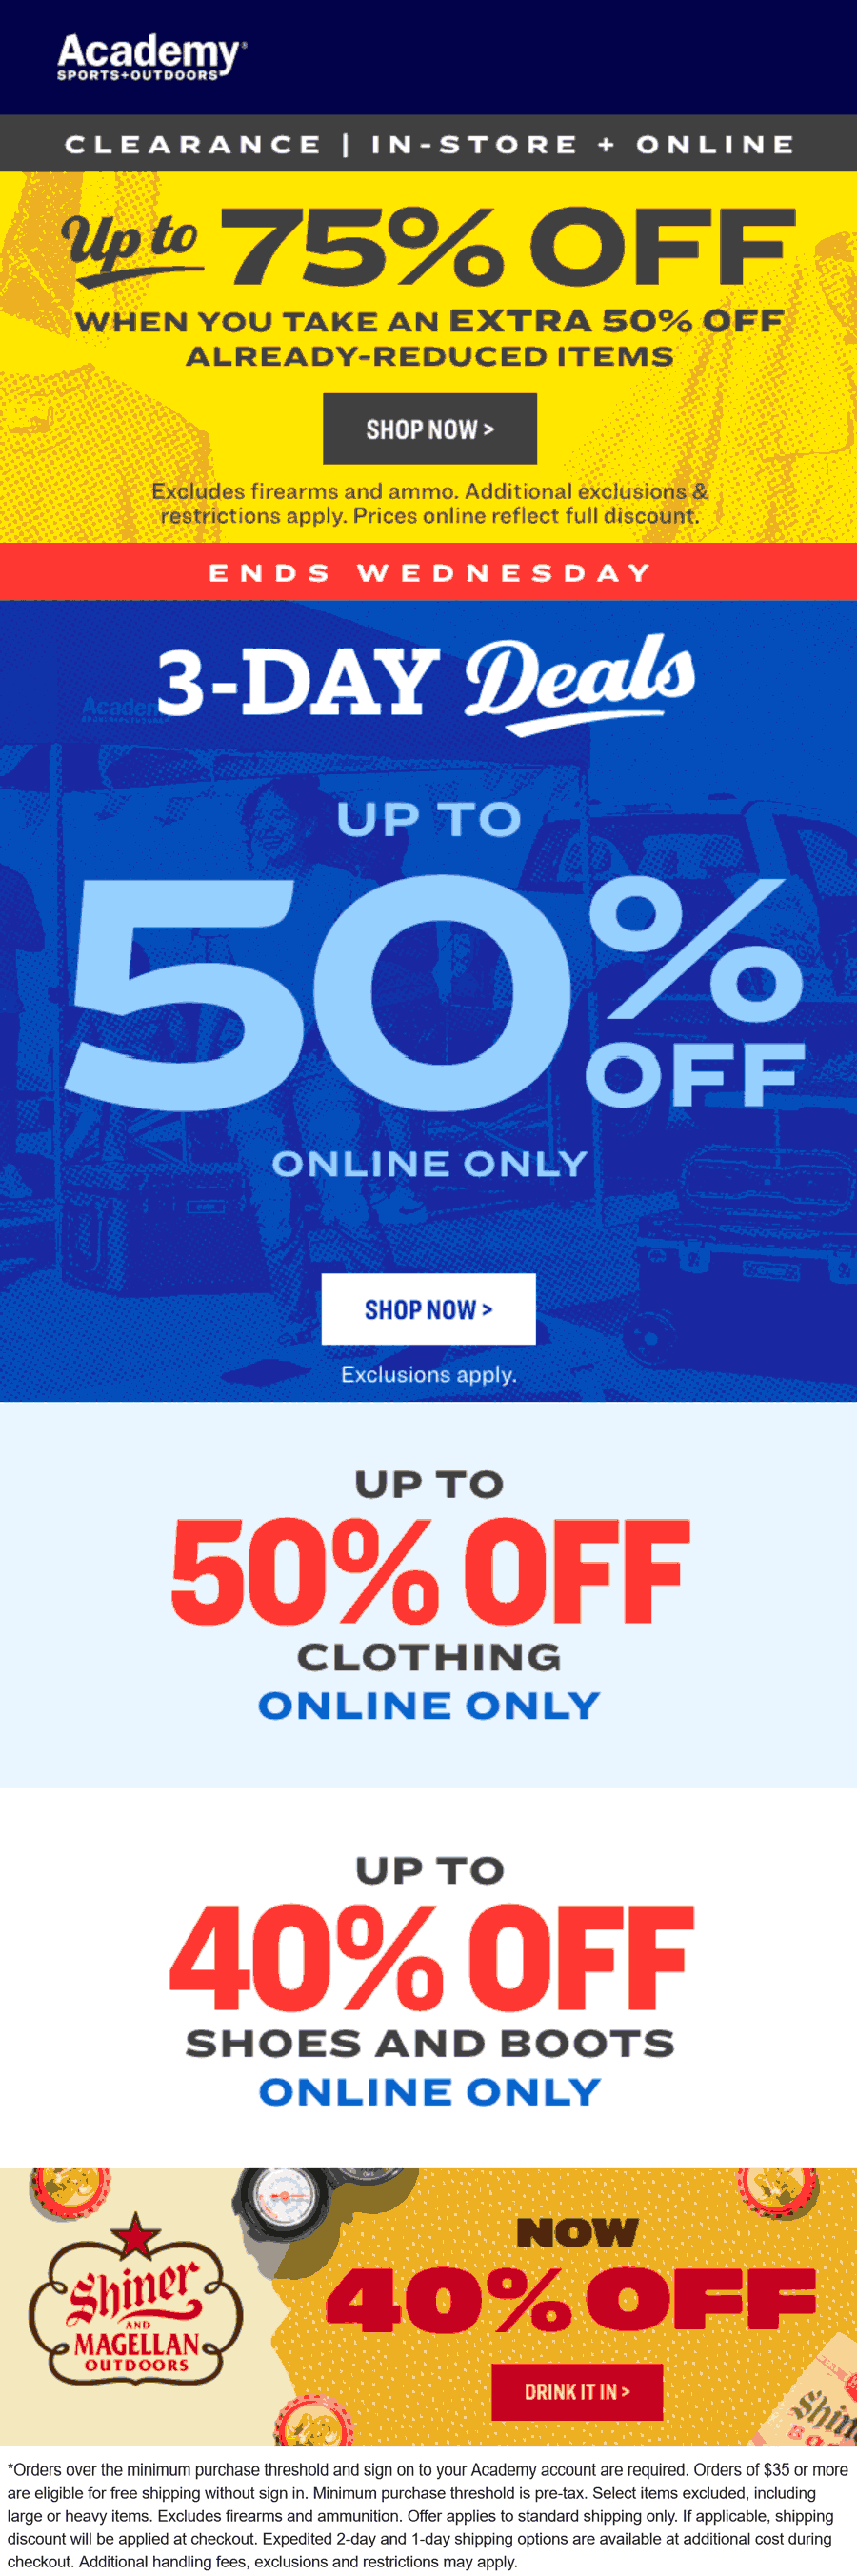 Academy stores Coupon  Extra 50% off clearance items at Academy Sports + Outdoors, ditto online #academy 